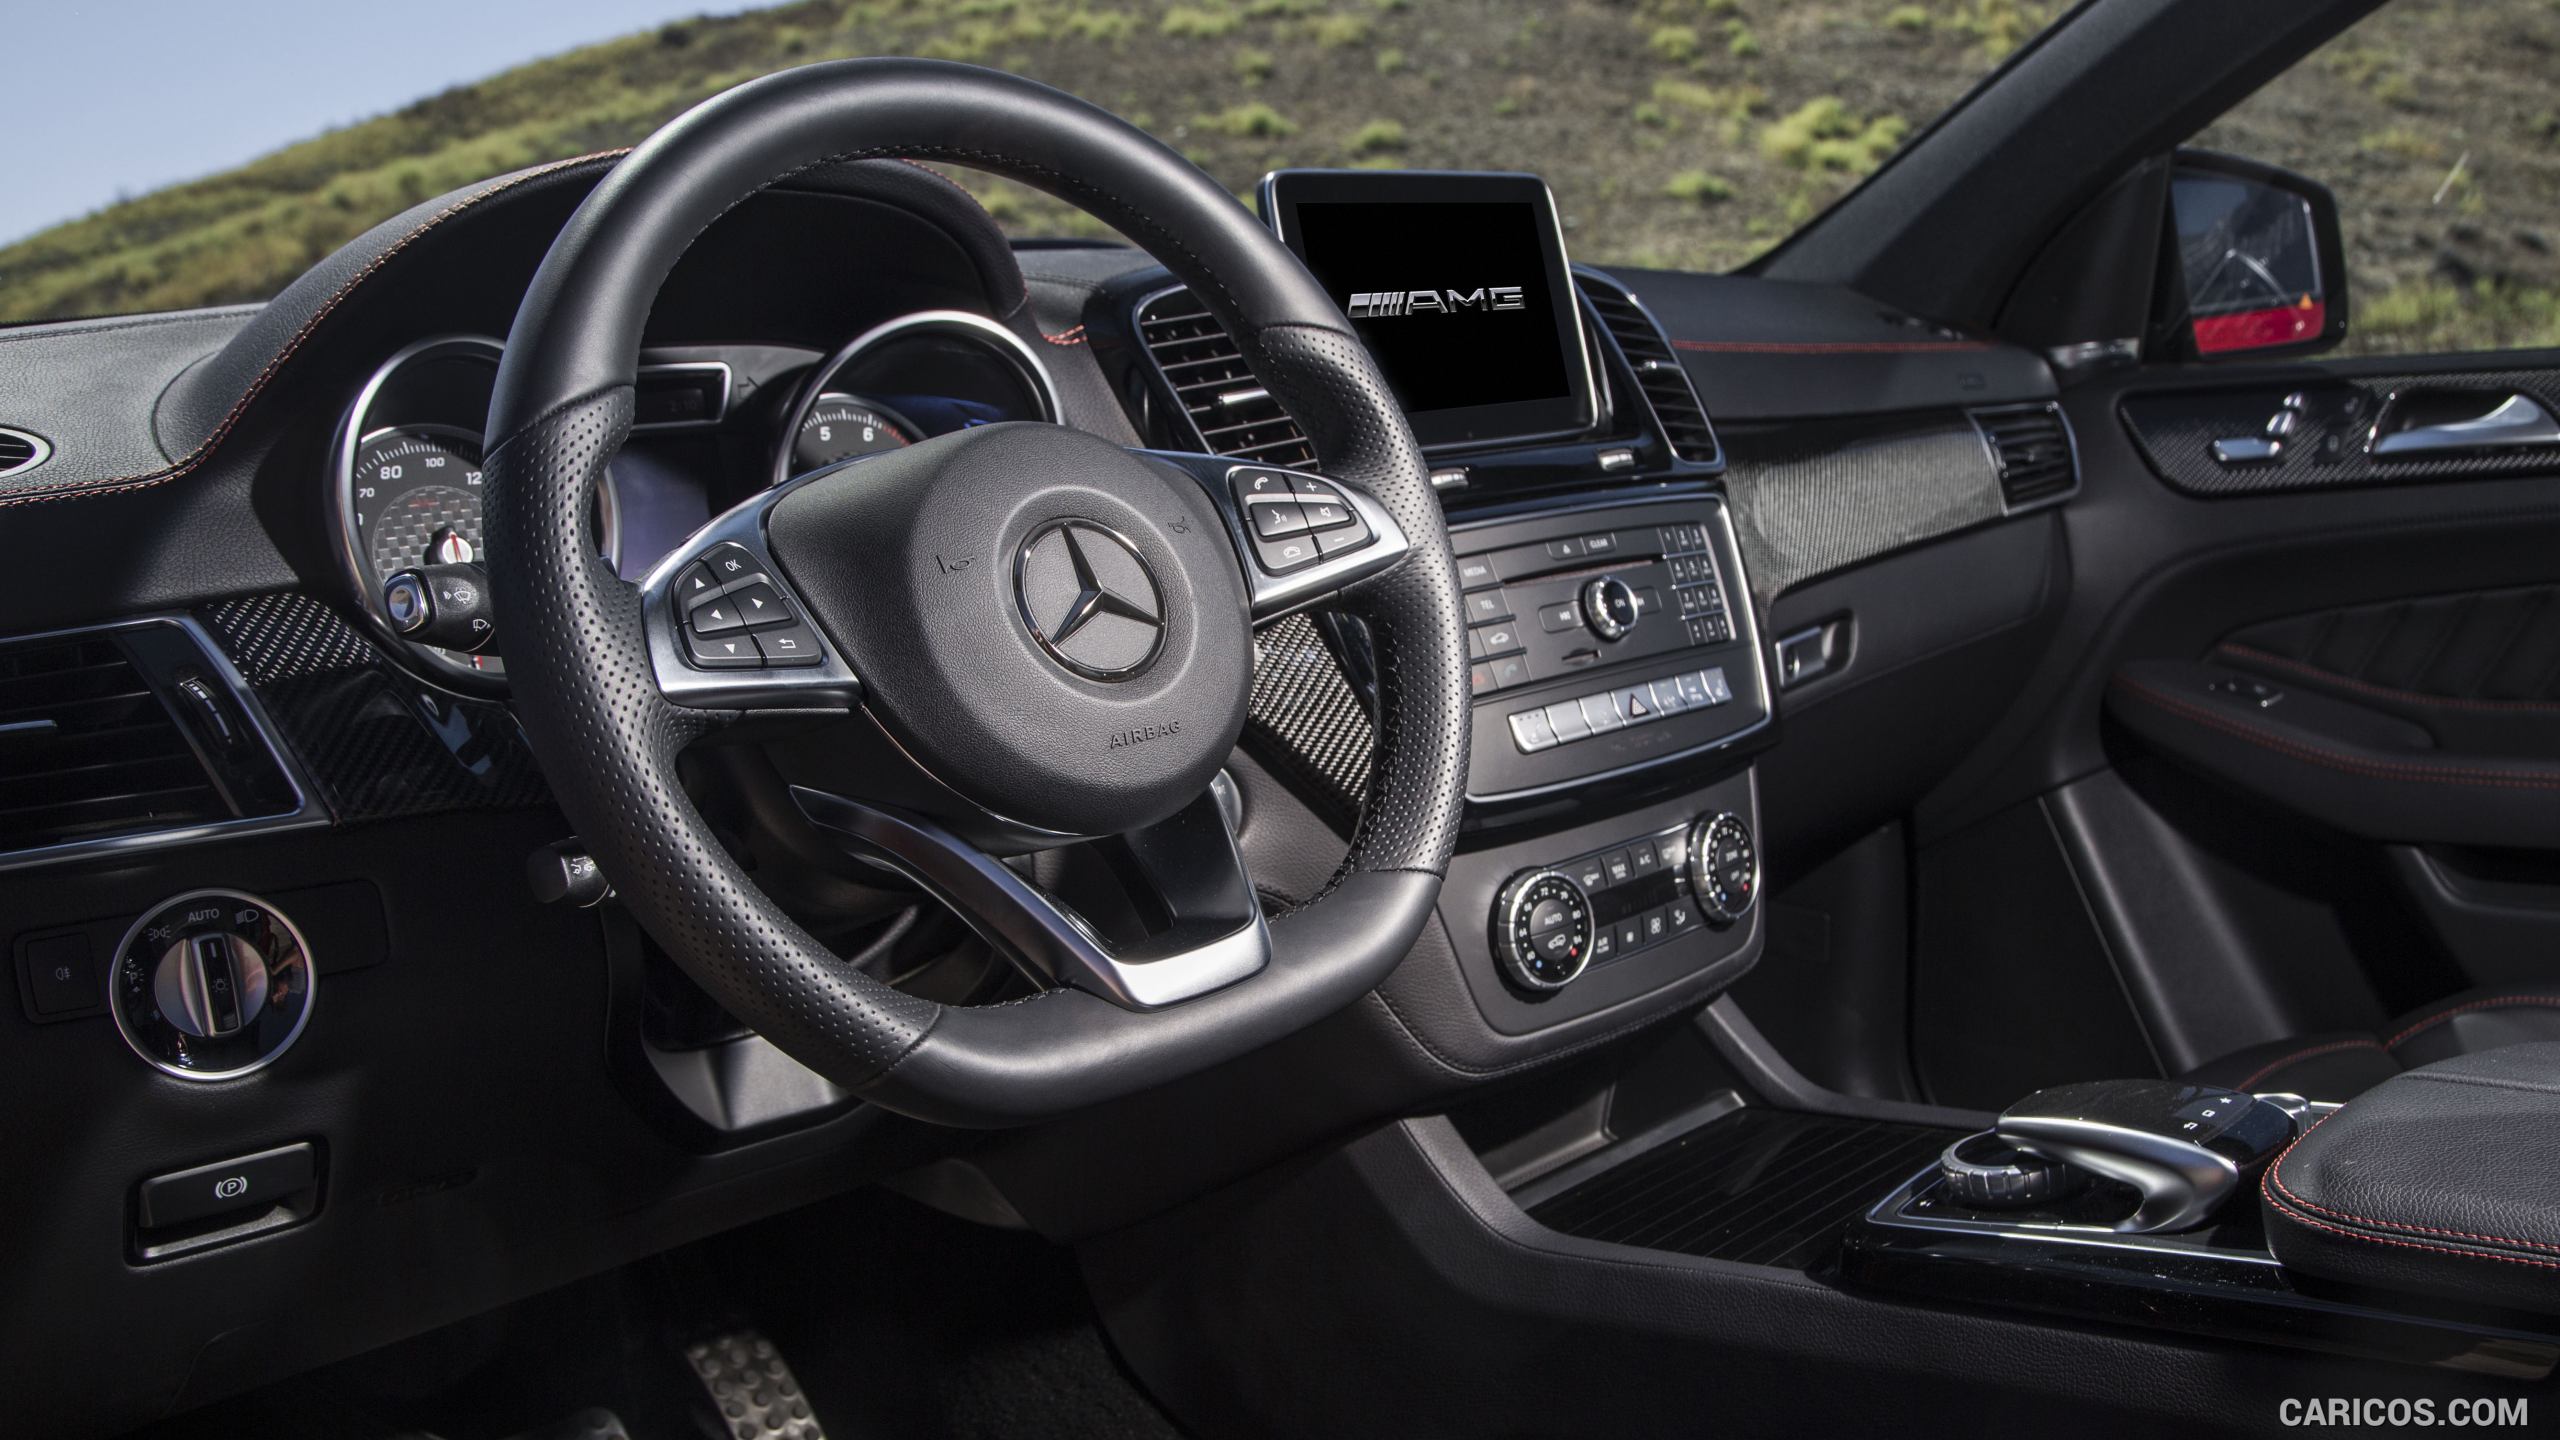 2016 Mercedes-Benz GLE 450 AMG Coupe 4MATIC (US-Spec) - Interior, #83 of 115